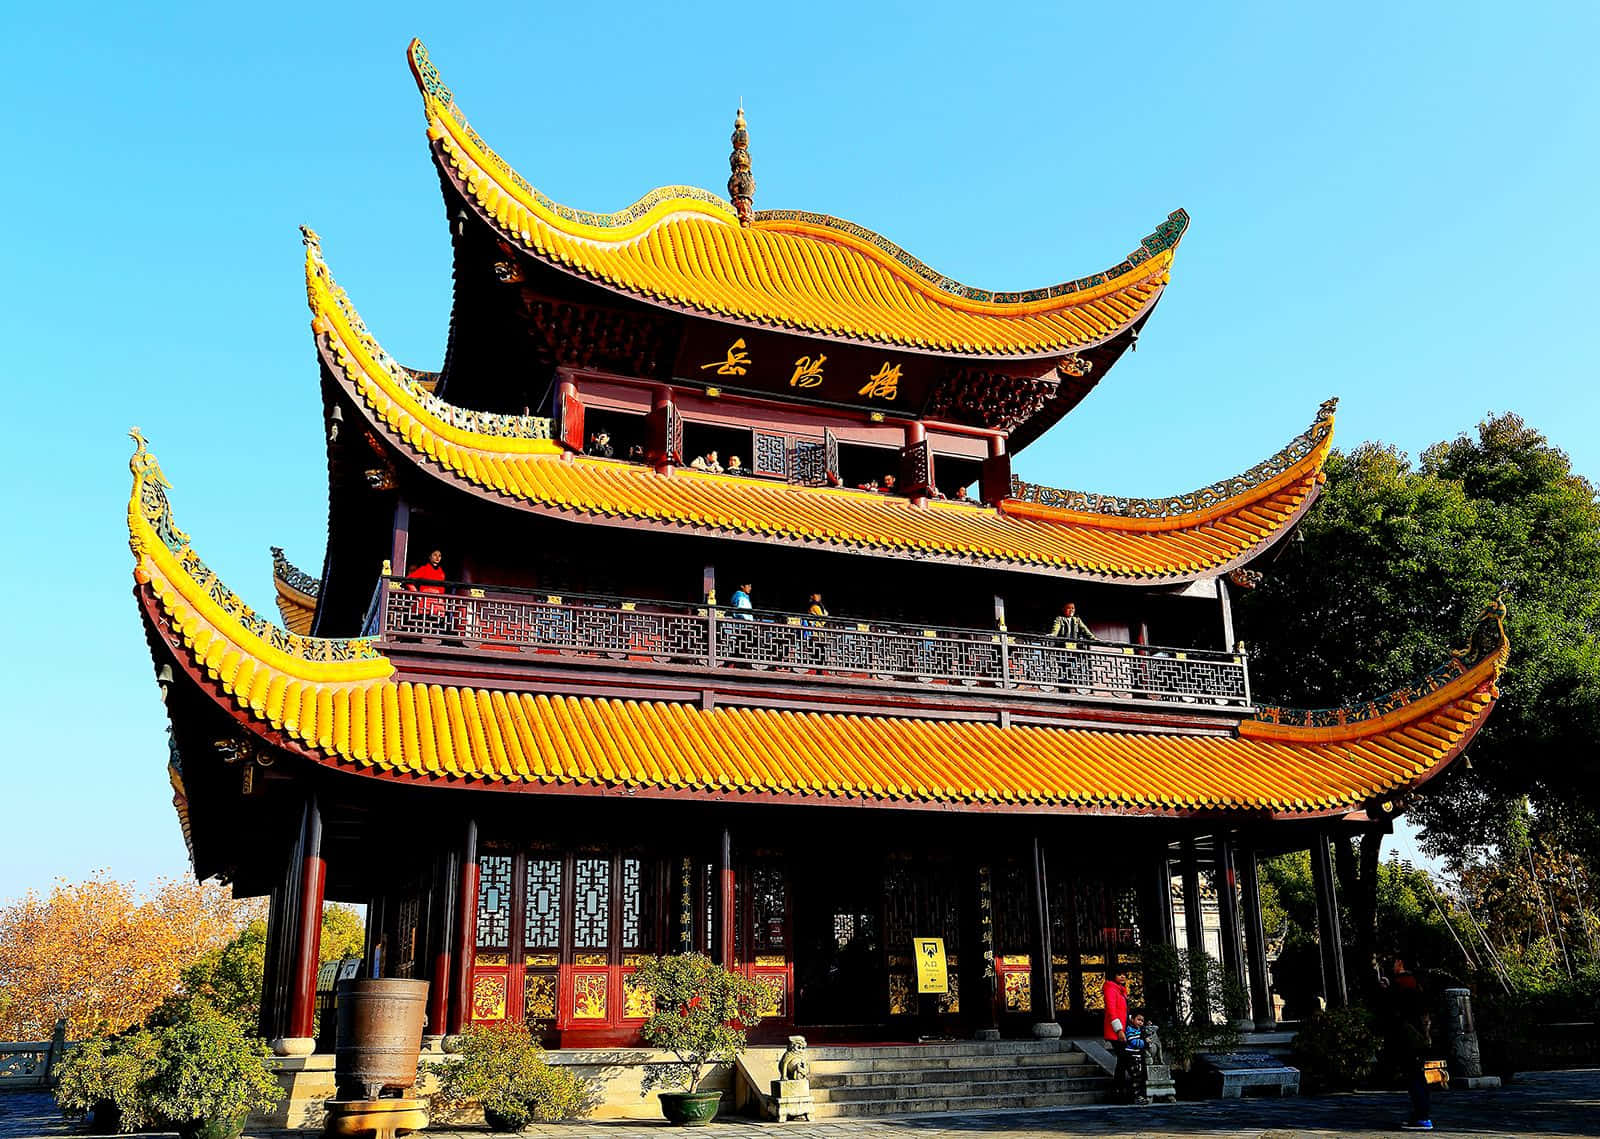 A Large Chinese Pagoda With Yellow Roof